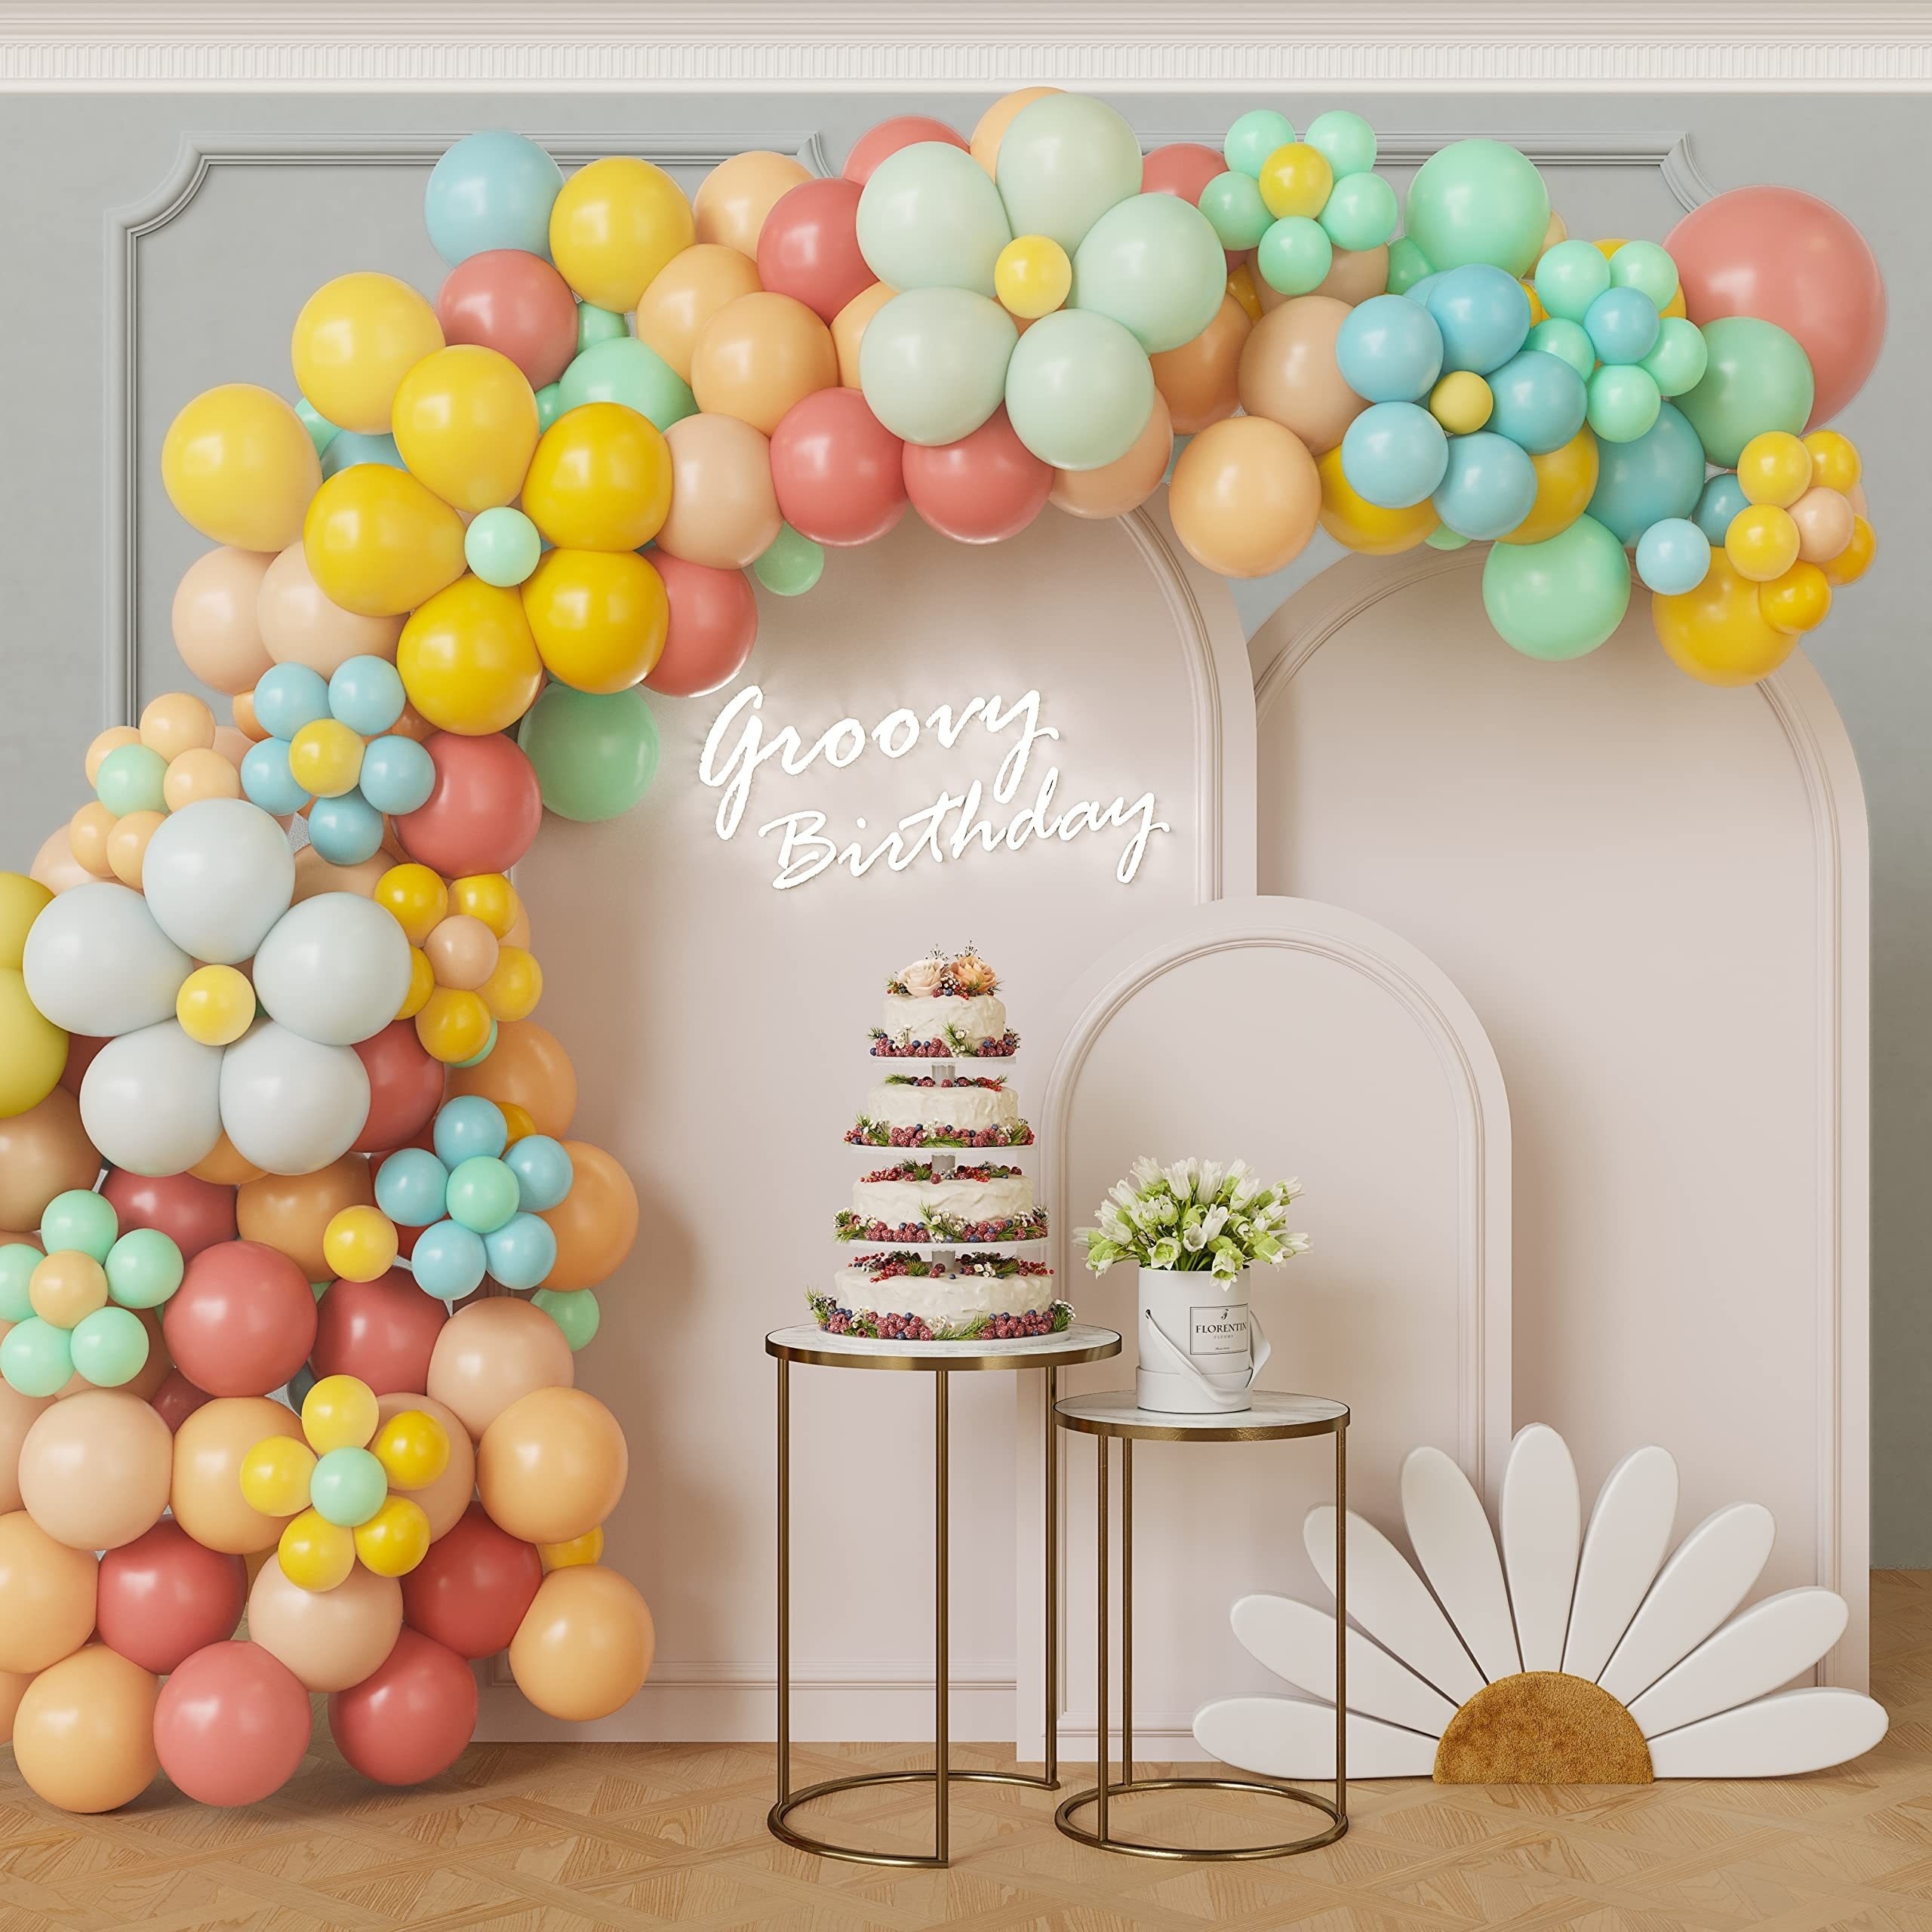 PartyWoo 140 pcs Pastel Balloon Garland, Pack of Pastel Colored Balloons,  Balloons in Assorted Pastel Colors for Unicorn Birthday Decorations, Baby